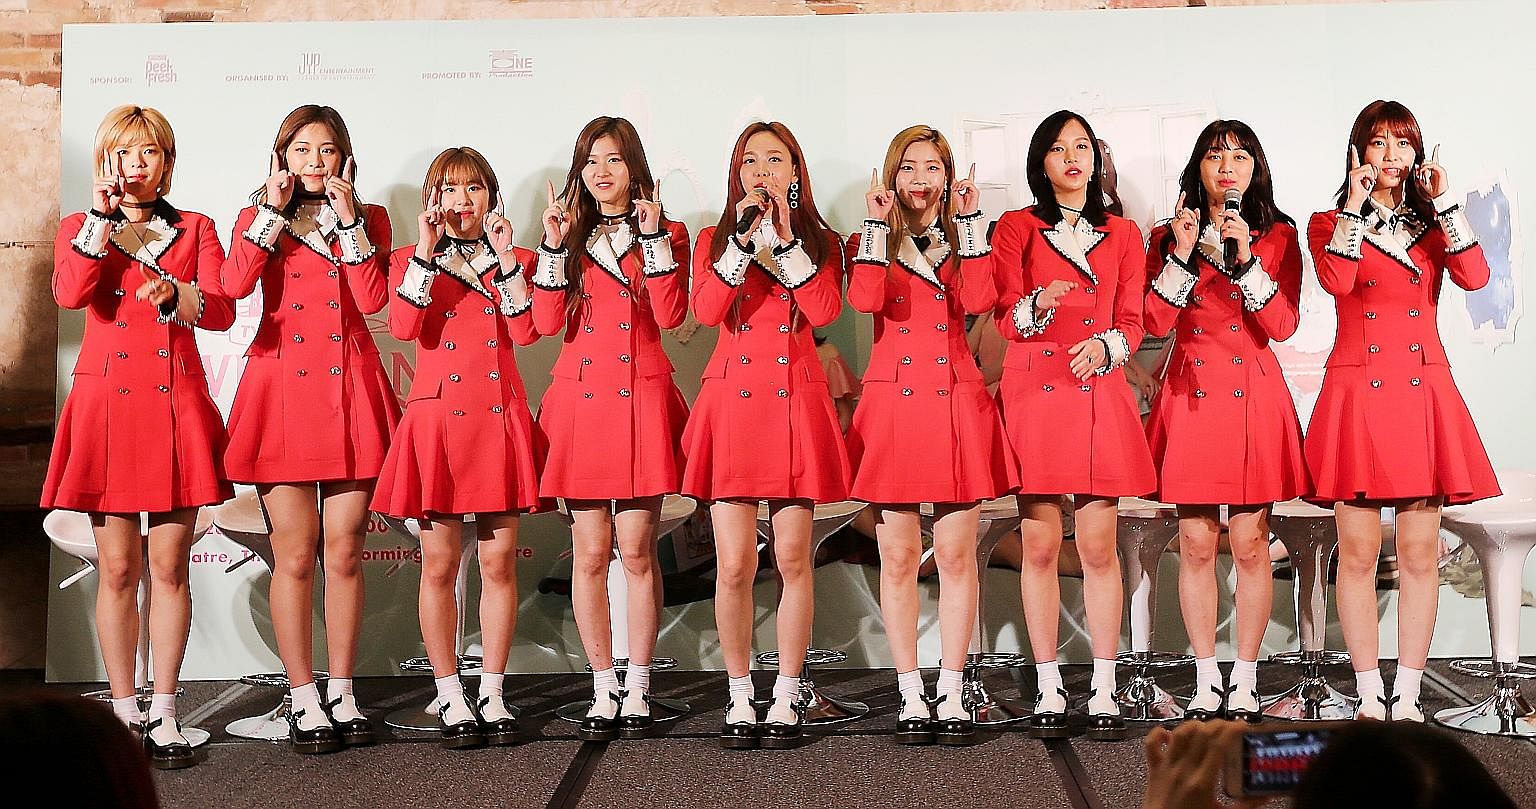 Touted to be the next big thing in K-pop are Twice's (from left) Jeongyeon, Tzuyu, Chaeyoung, Sana, Nayeon, Dahyun, Mina, Jihyo and Momo.